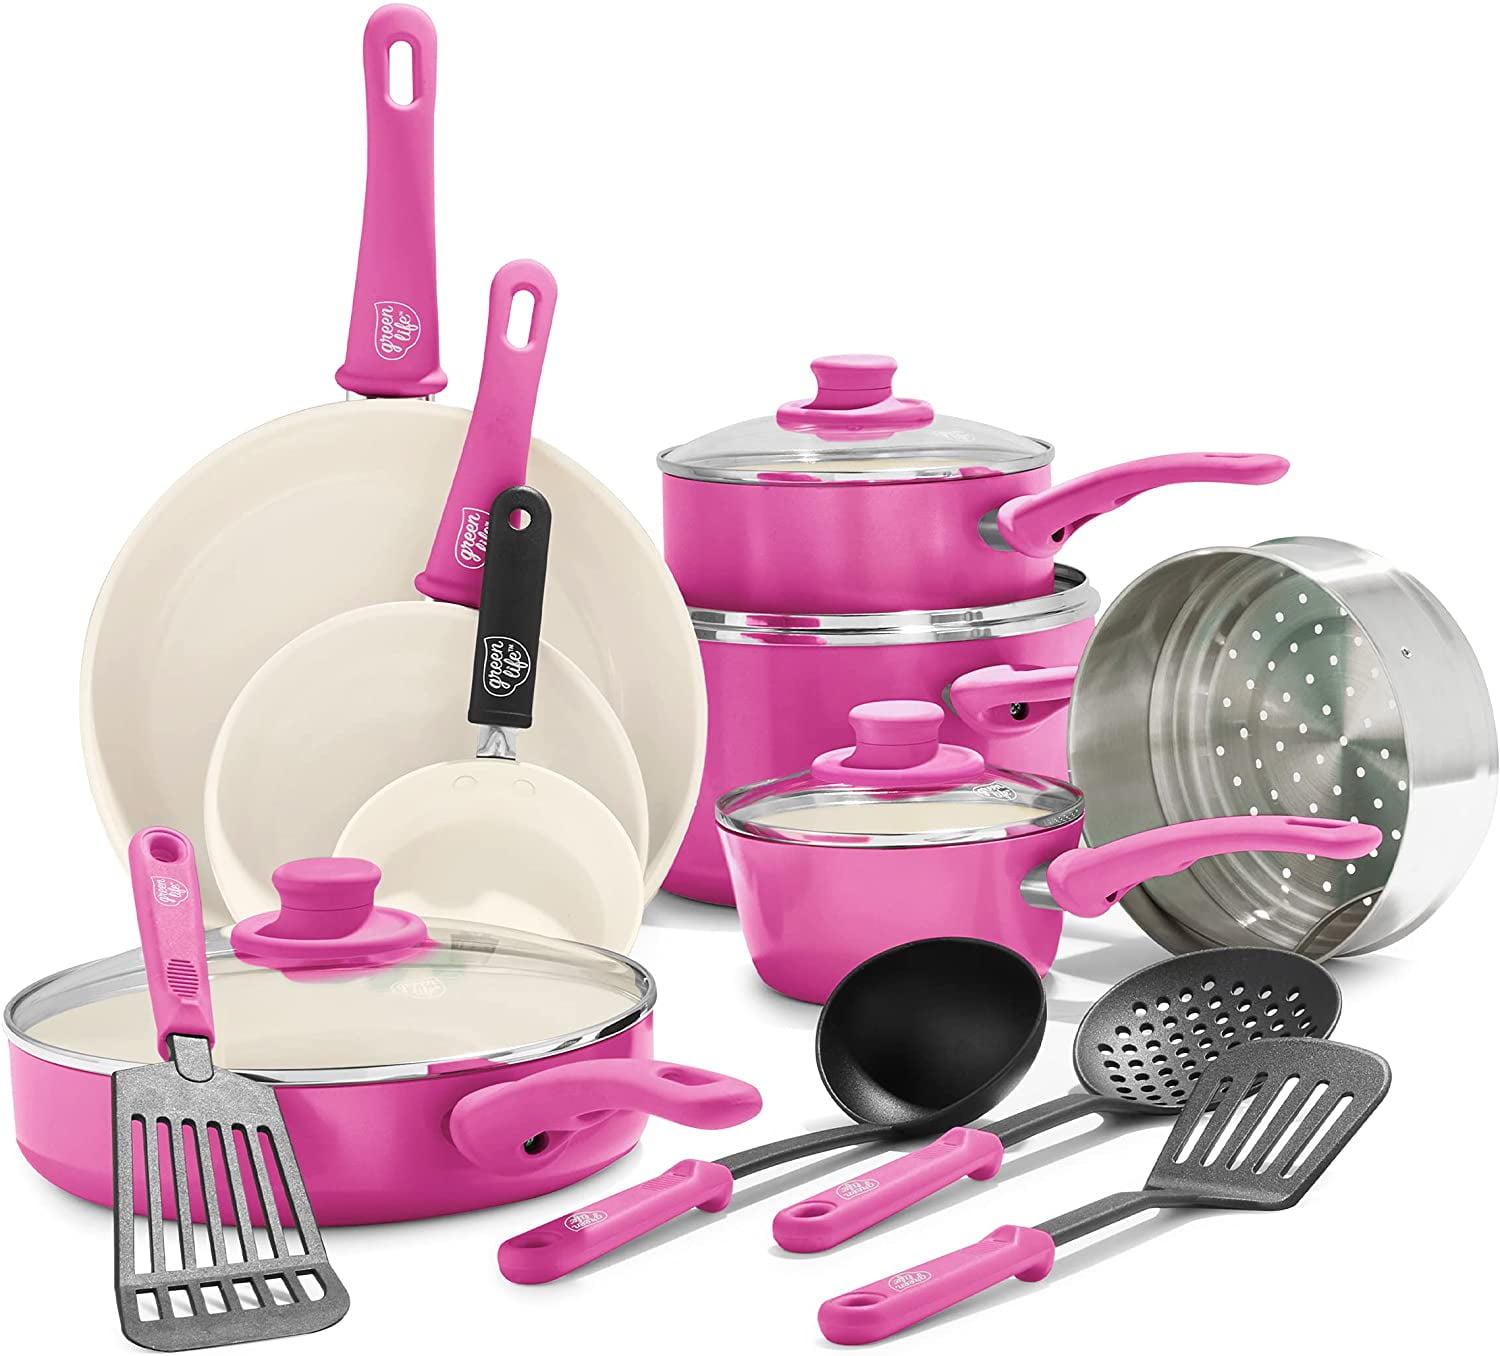 16 Piece GreenLife Soft Grip Healthy Ceramic Nonstick, Cookware Pots and Pans  Set, Bright Pink 